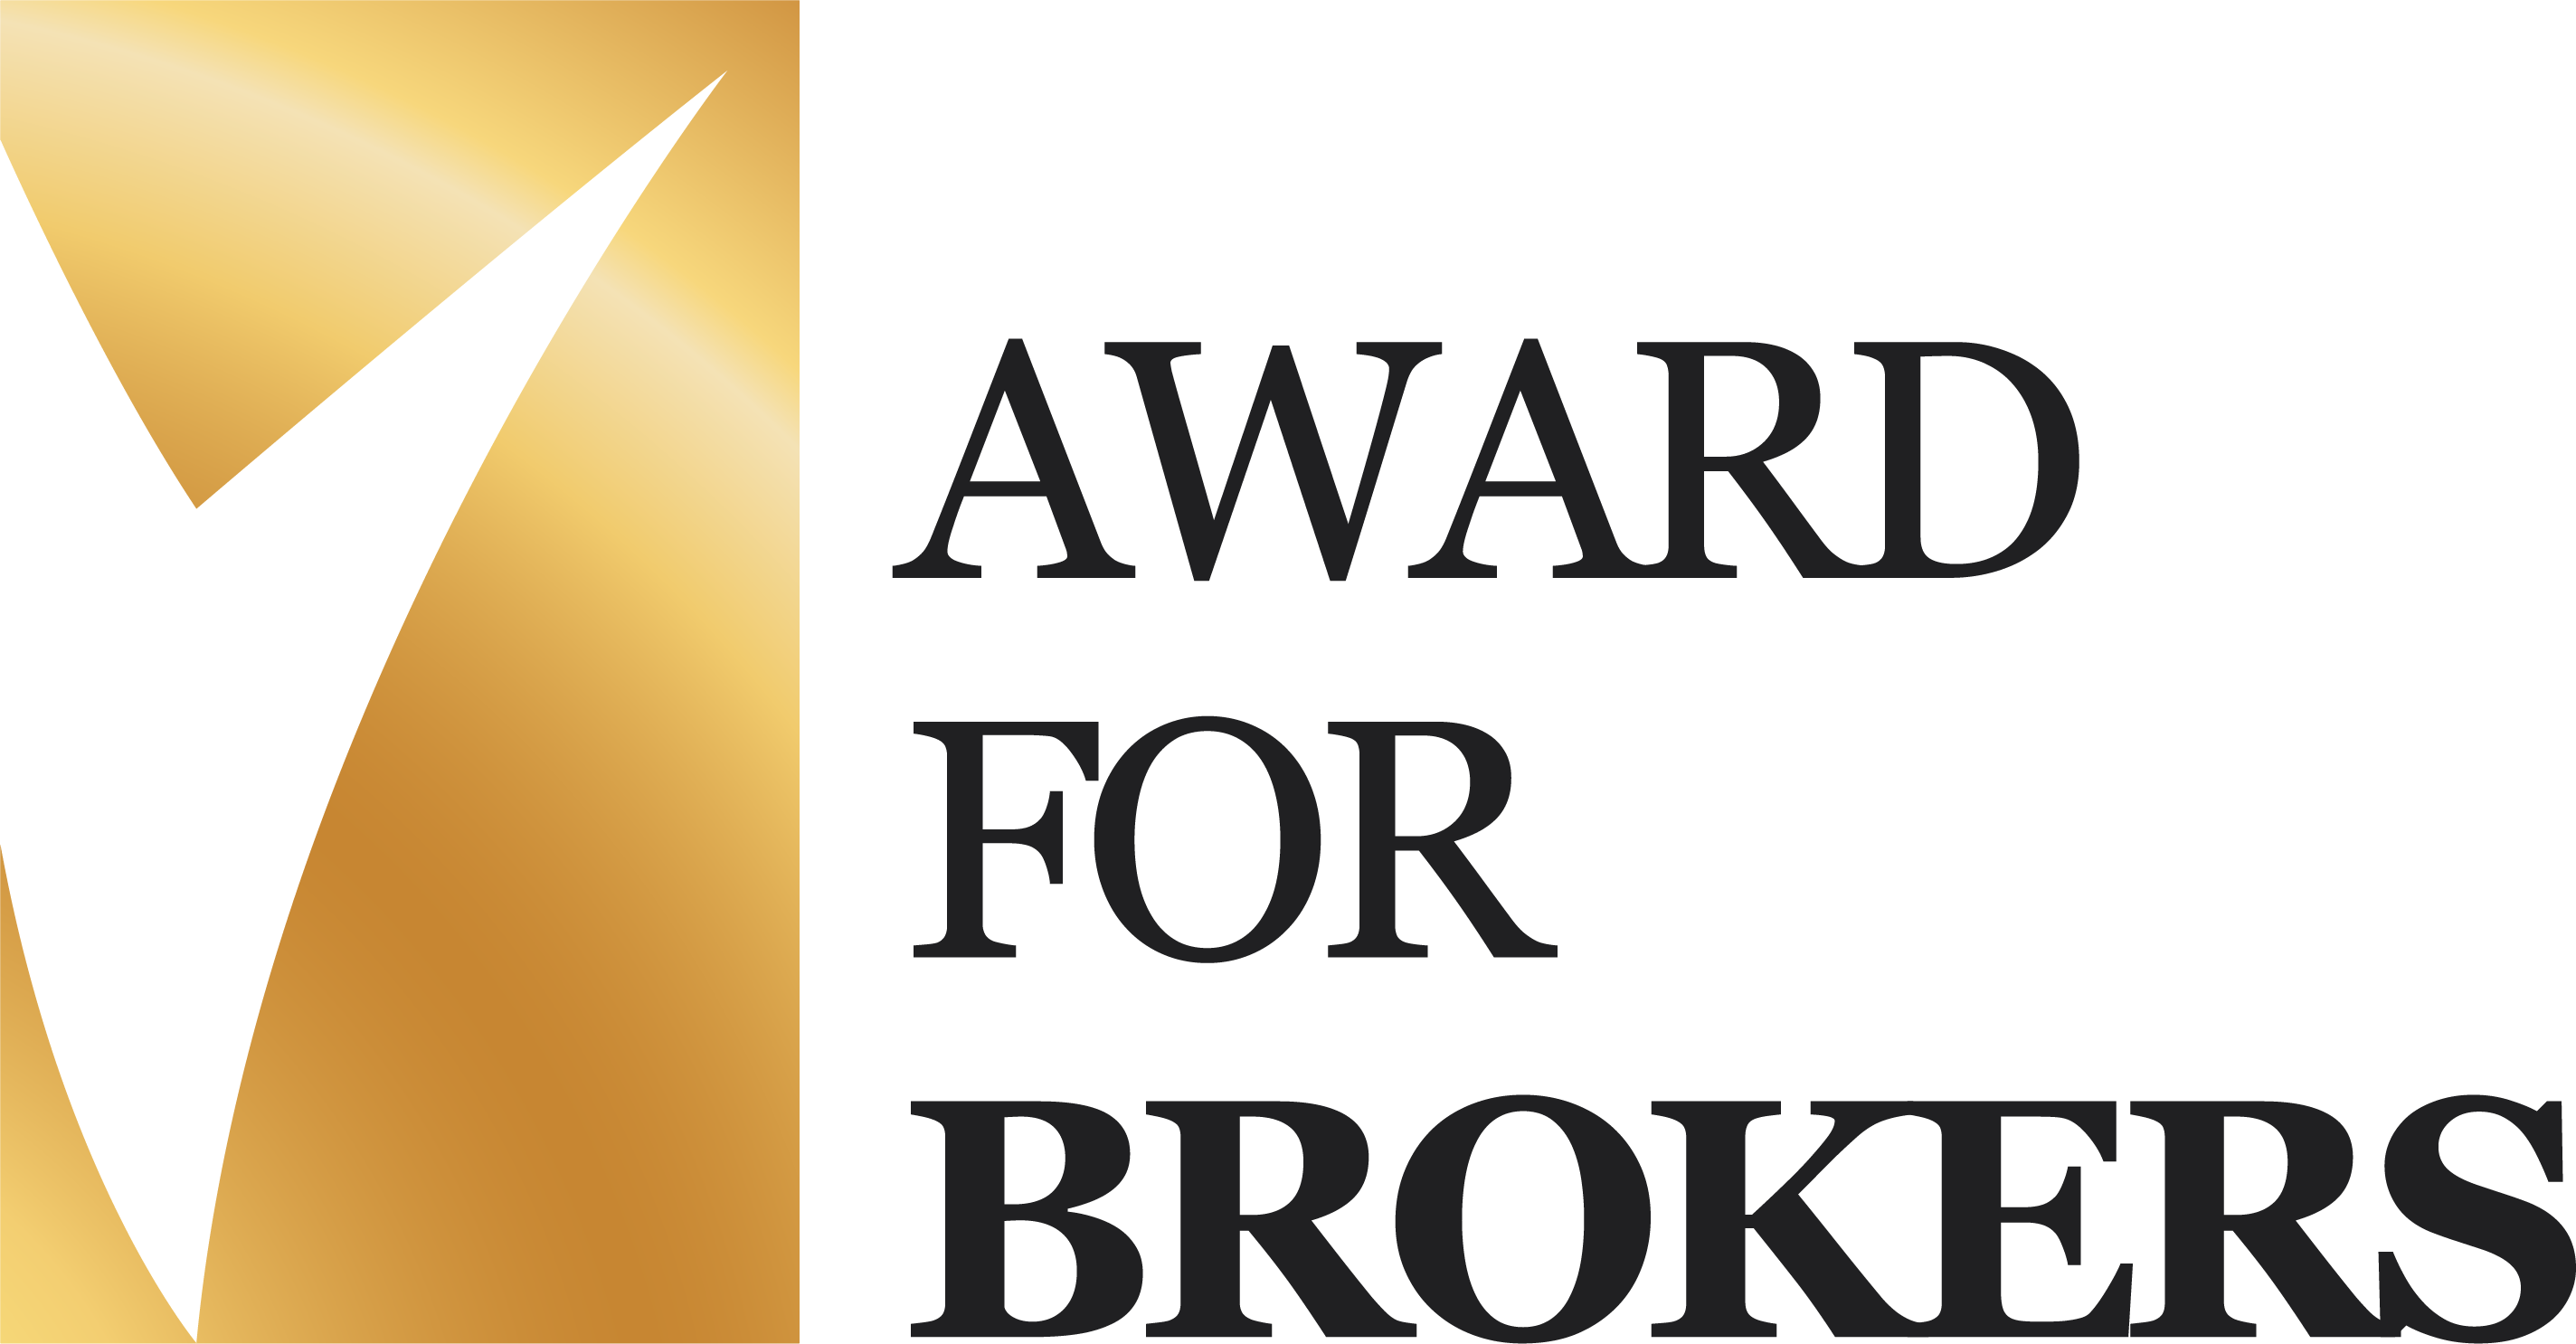 Awards for Brokers